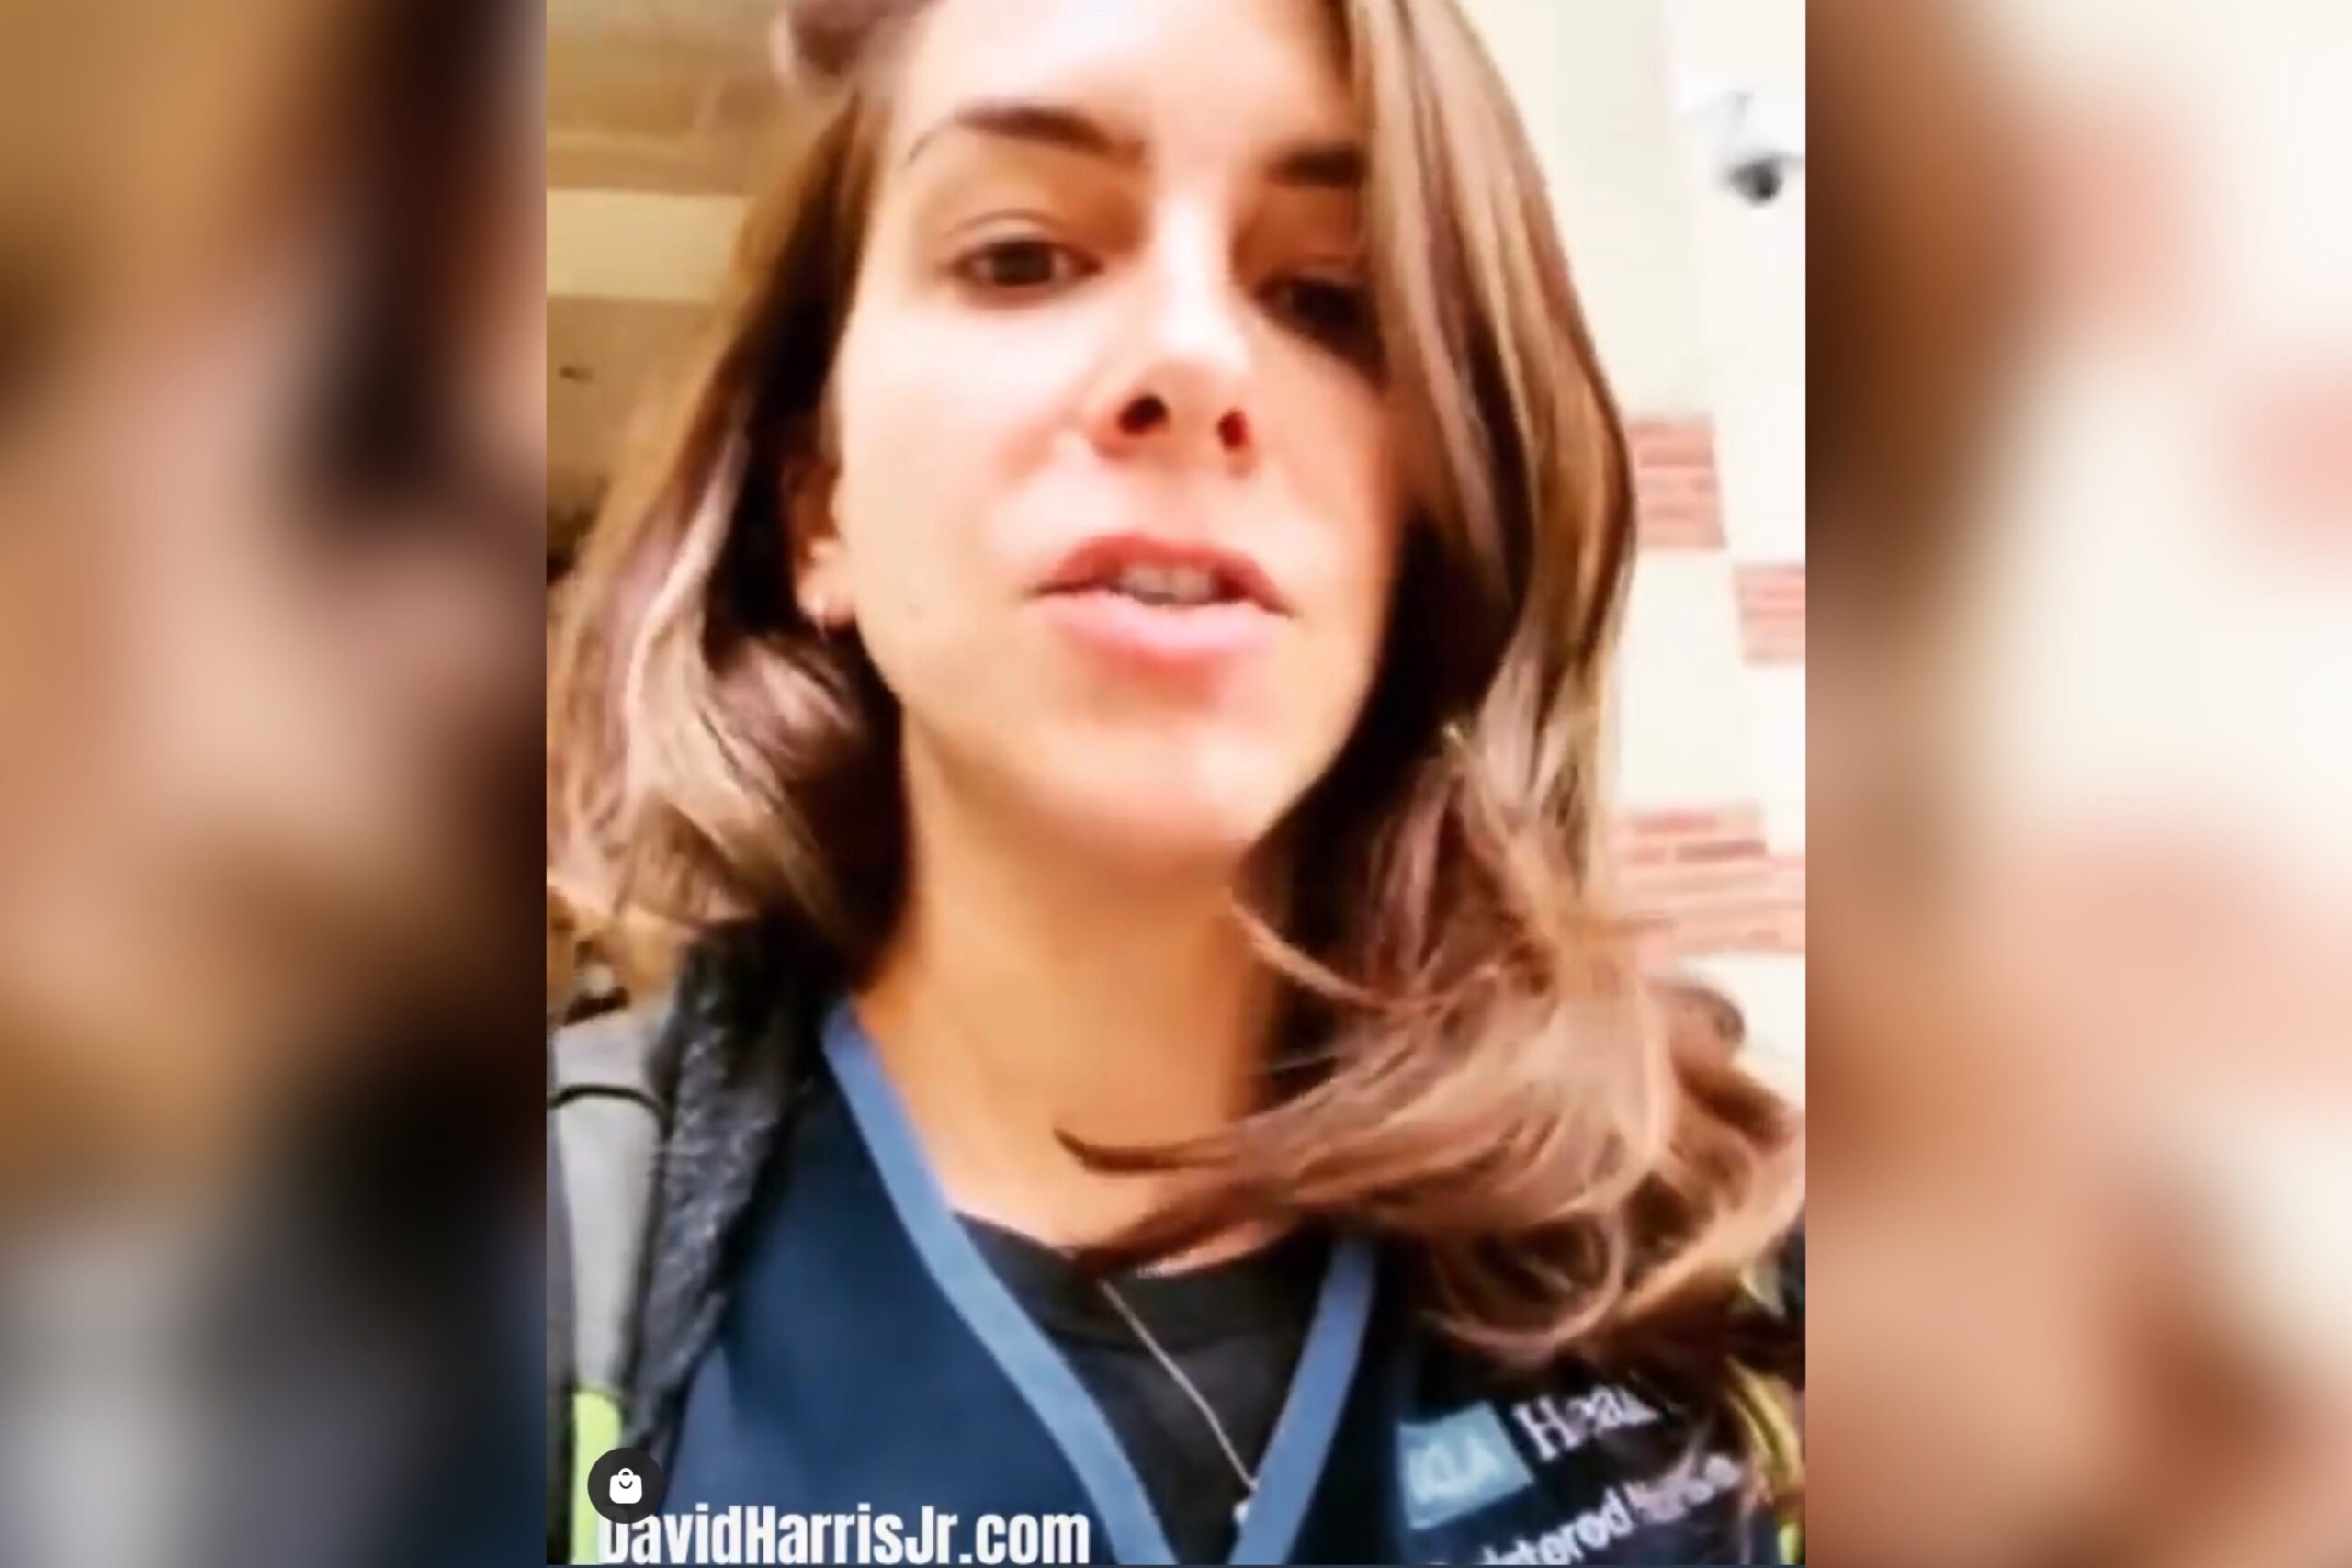 "I'm gonna fight for all of us out there, and I will continue to fight" - ICU Nurse Escorted Out of Her Job at UCLA For Not Taking the Vaccine (VIDEO) | The Gateway Pundit | by Jim Hᴏft